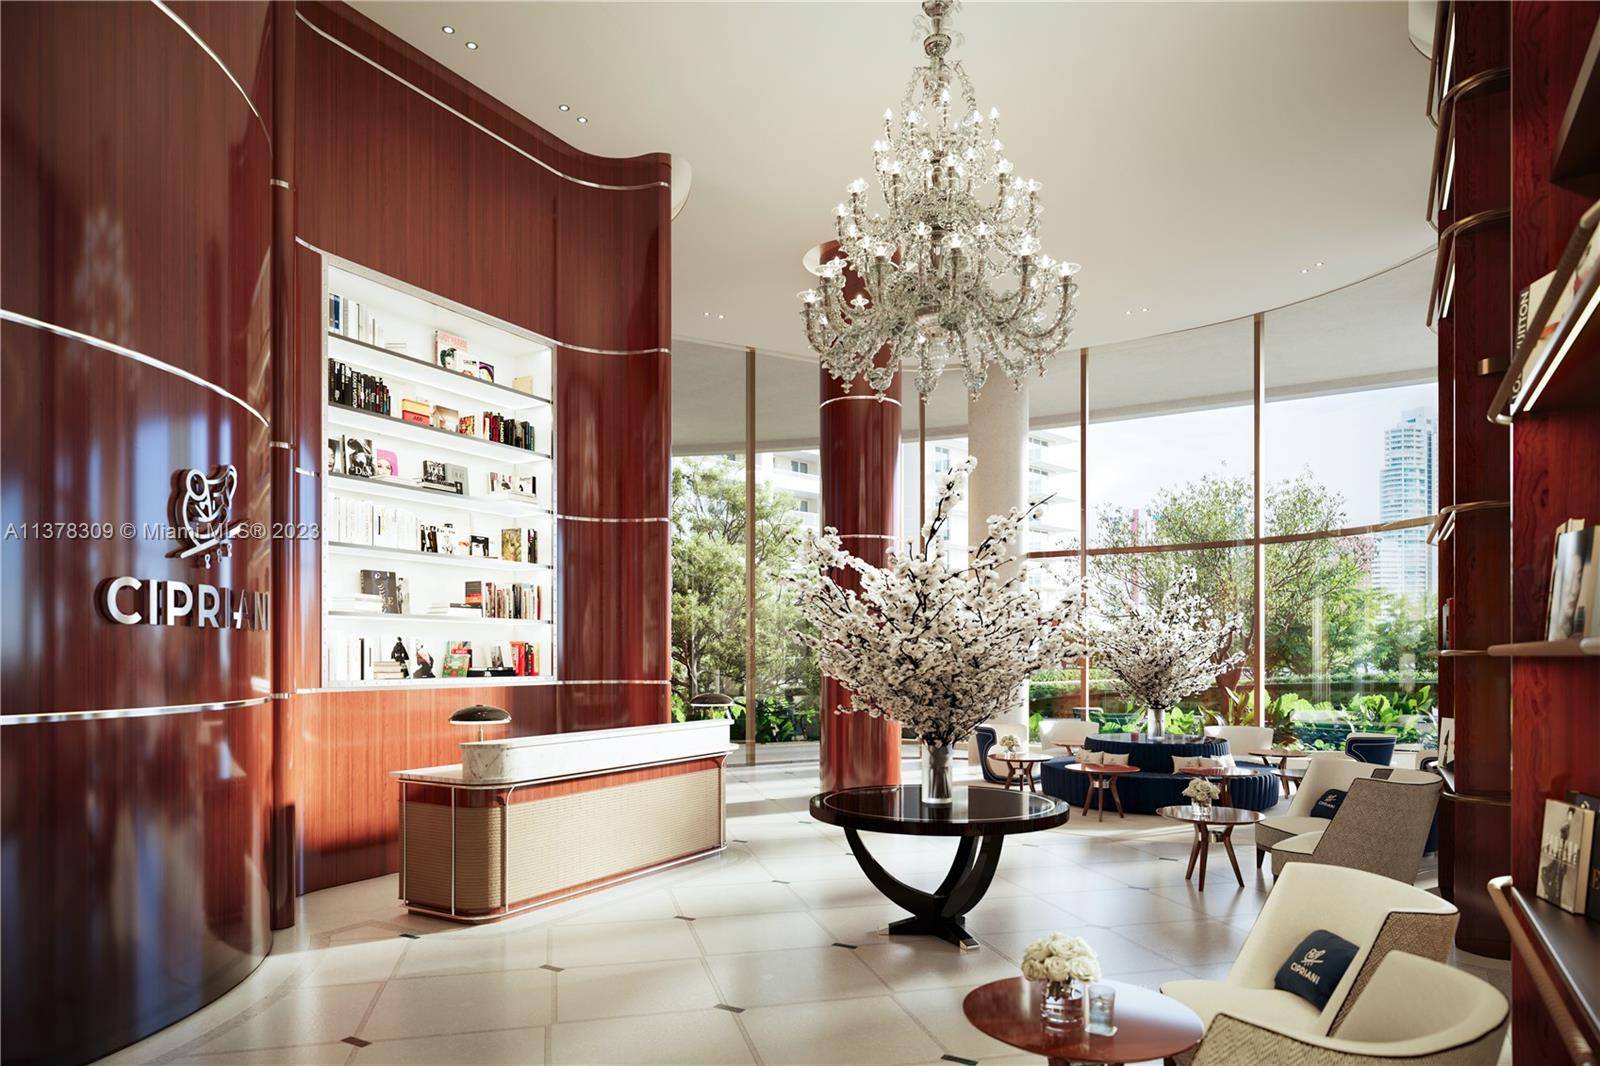 European glamour now in Miami, Cipriani Residences Miami is the first ever new construction luxury tower by Cipriani in the world.